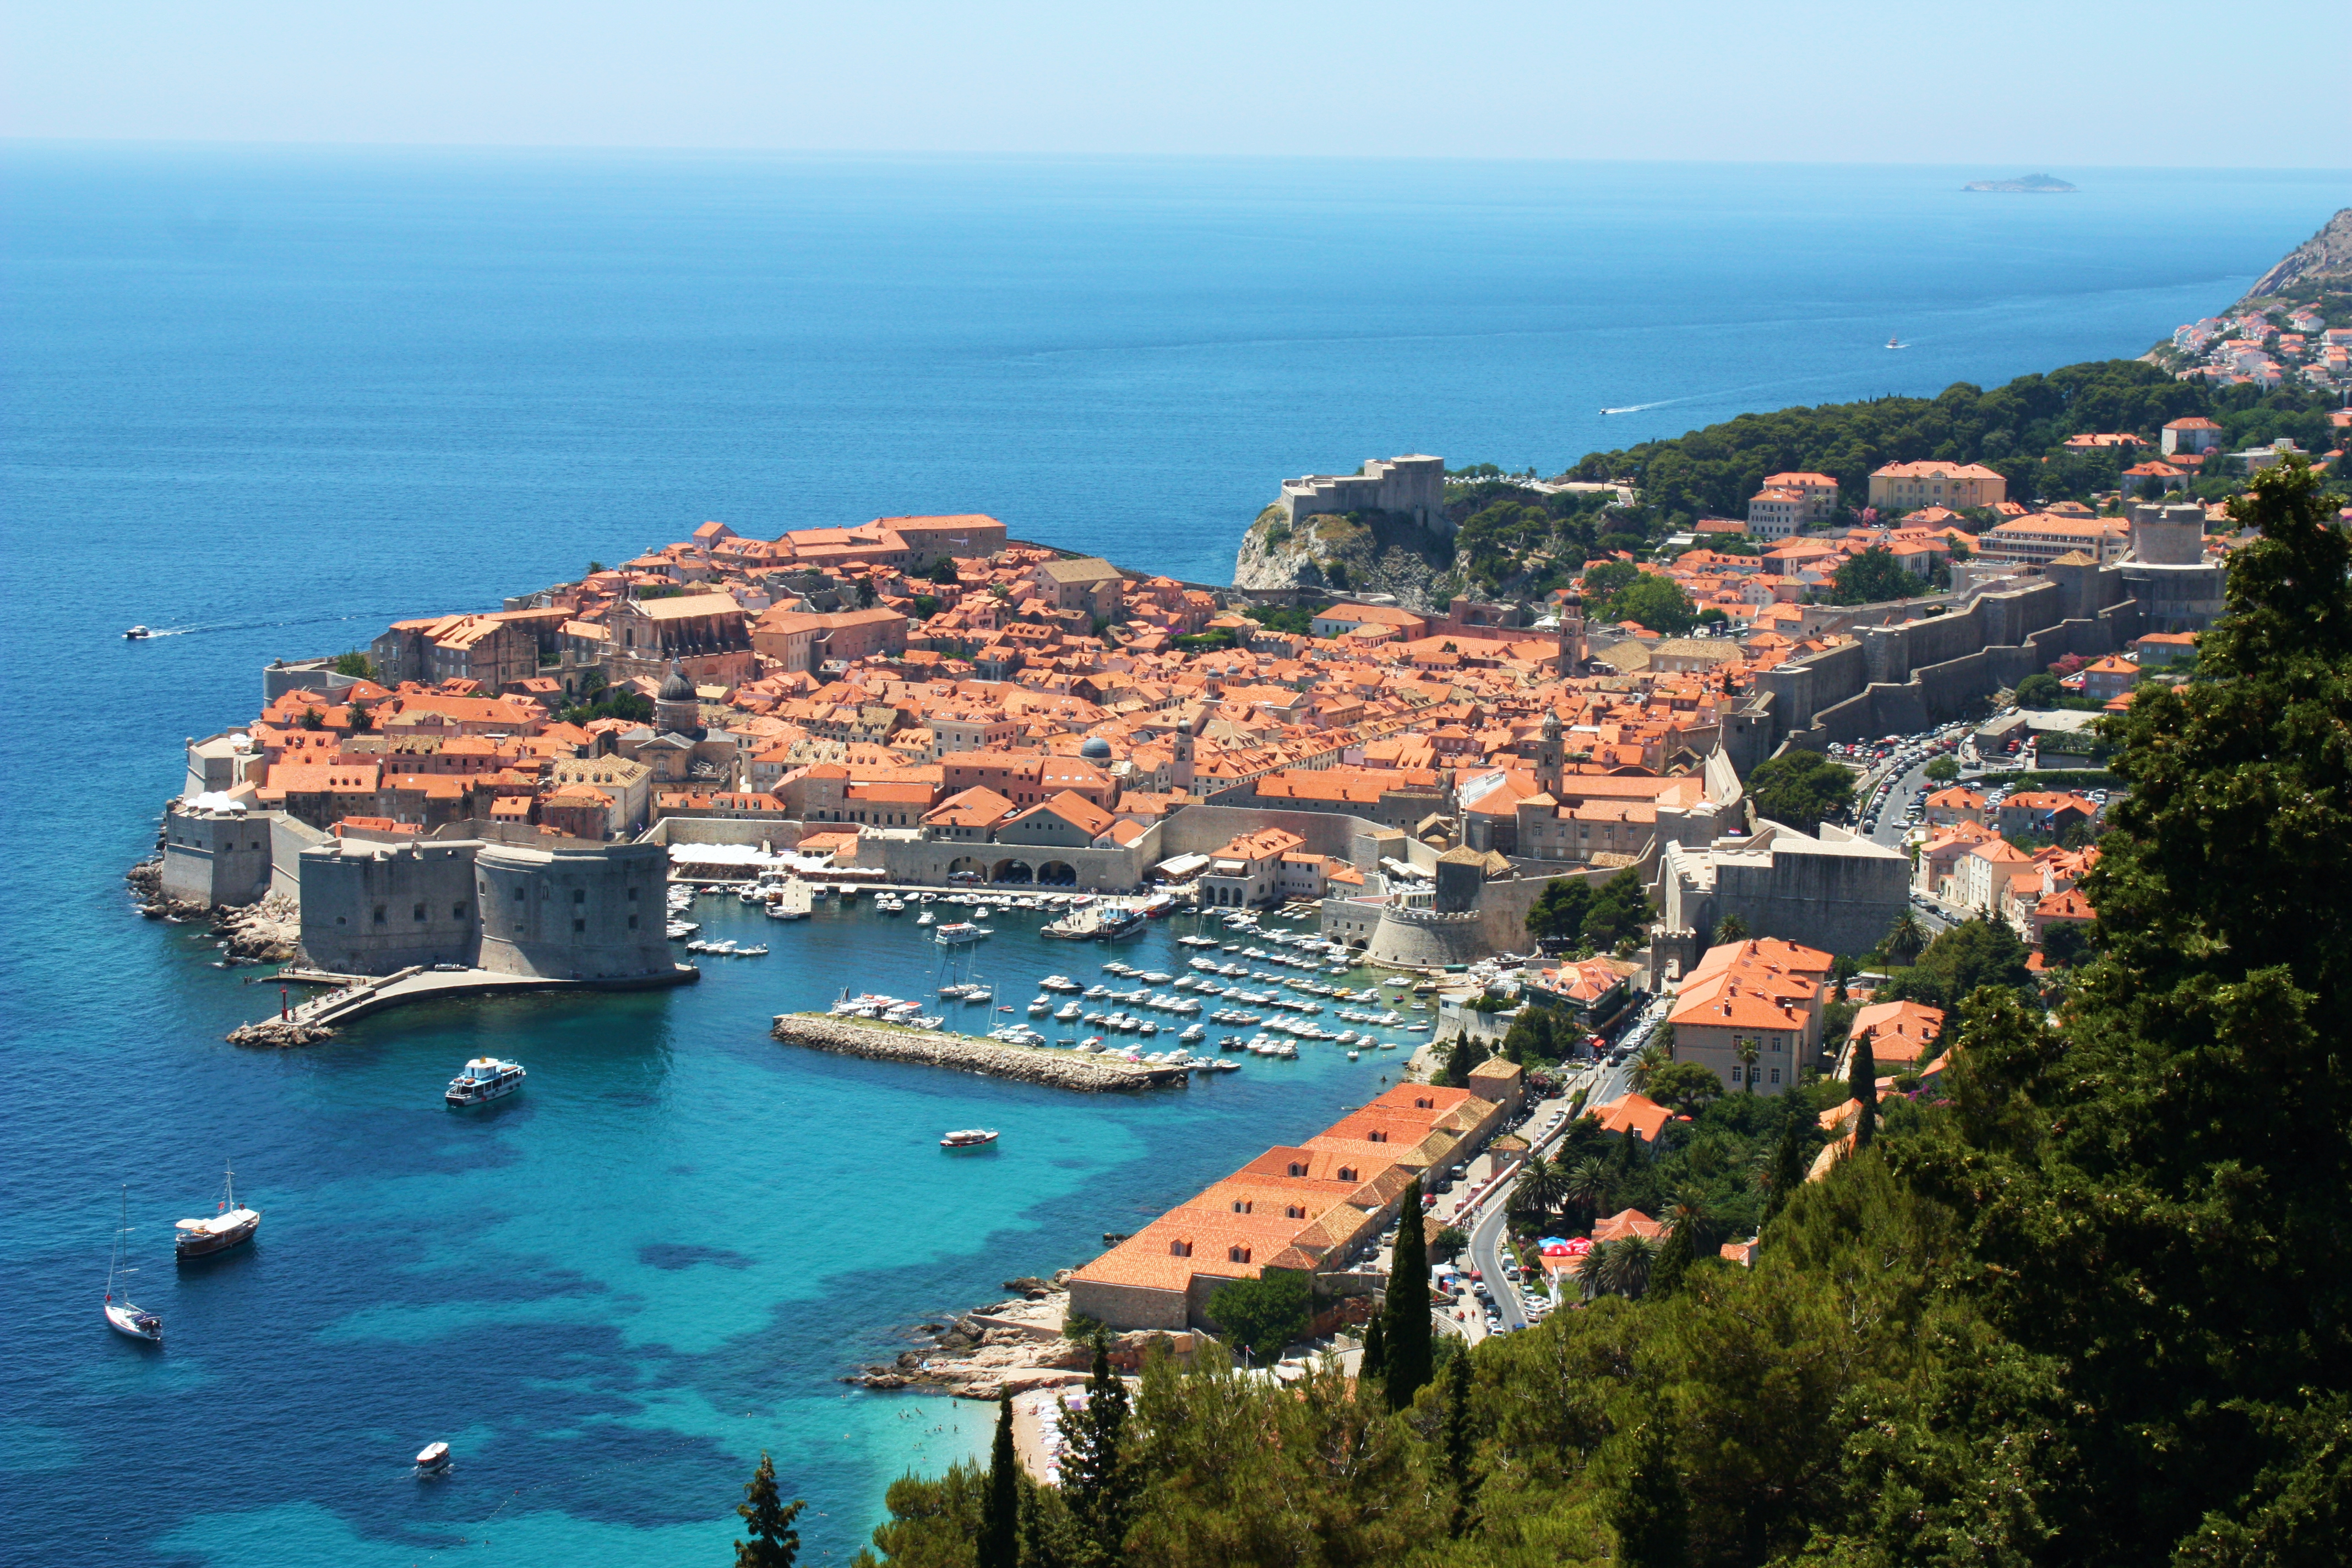 Old Town of Dubrovnik has been included in the UNESCO's list of World Heritage Sites since 1979.